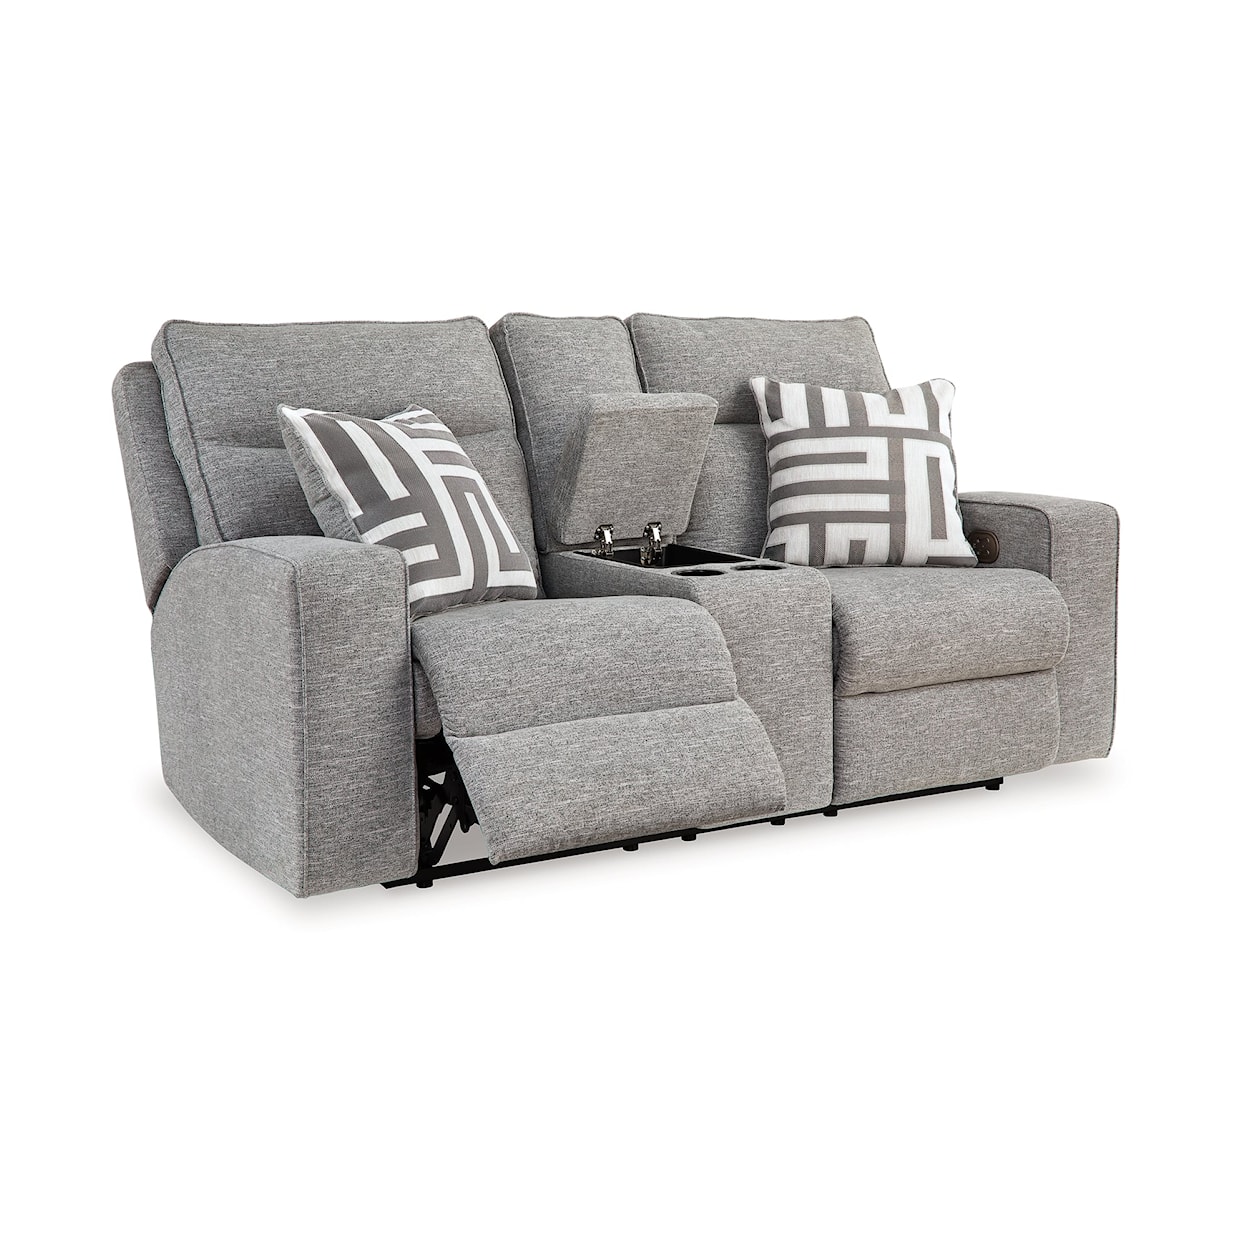 Signature Design by Ashley Biscoe PWR REC Loveseat/CON/ADJ HDRST